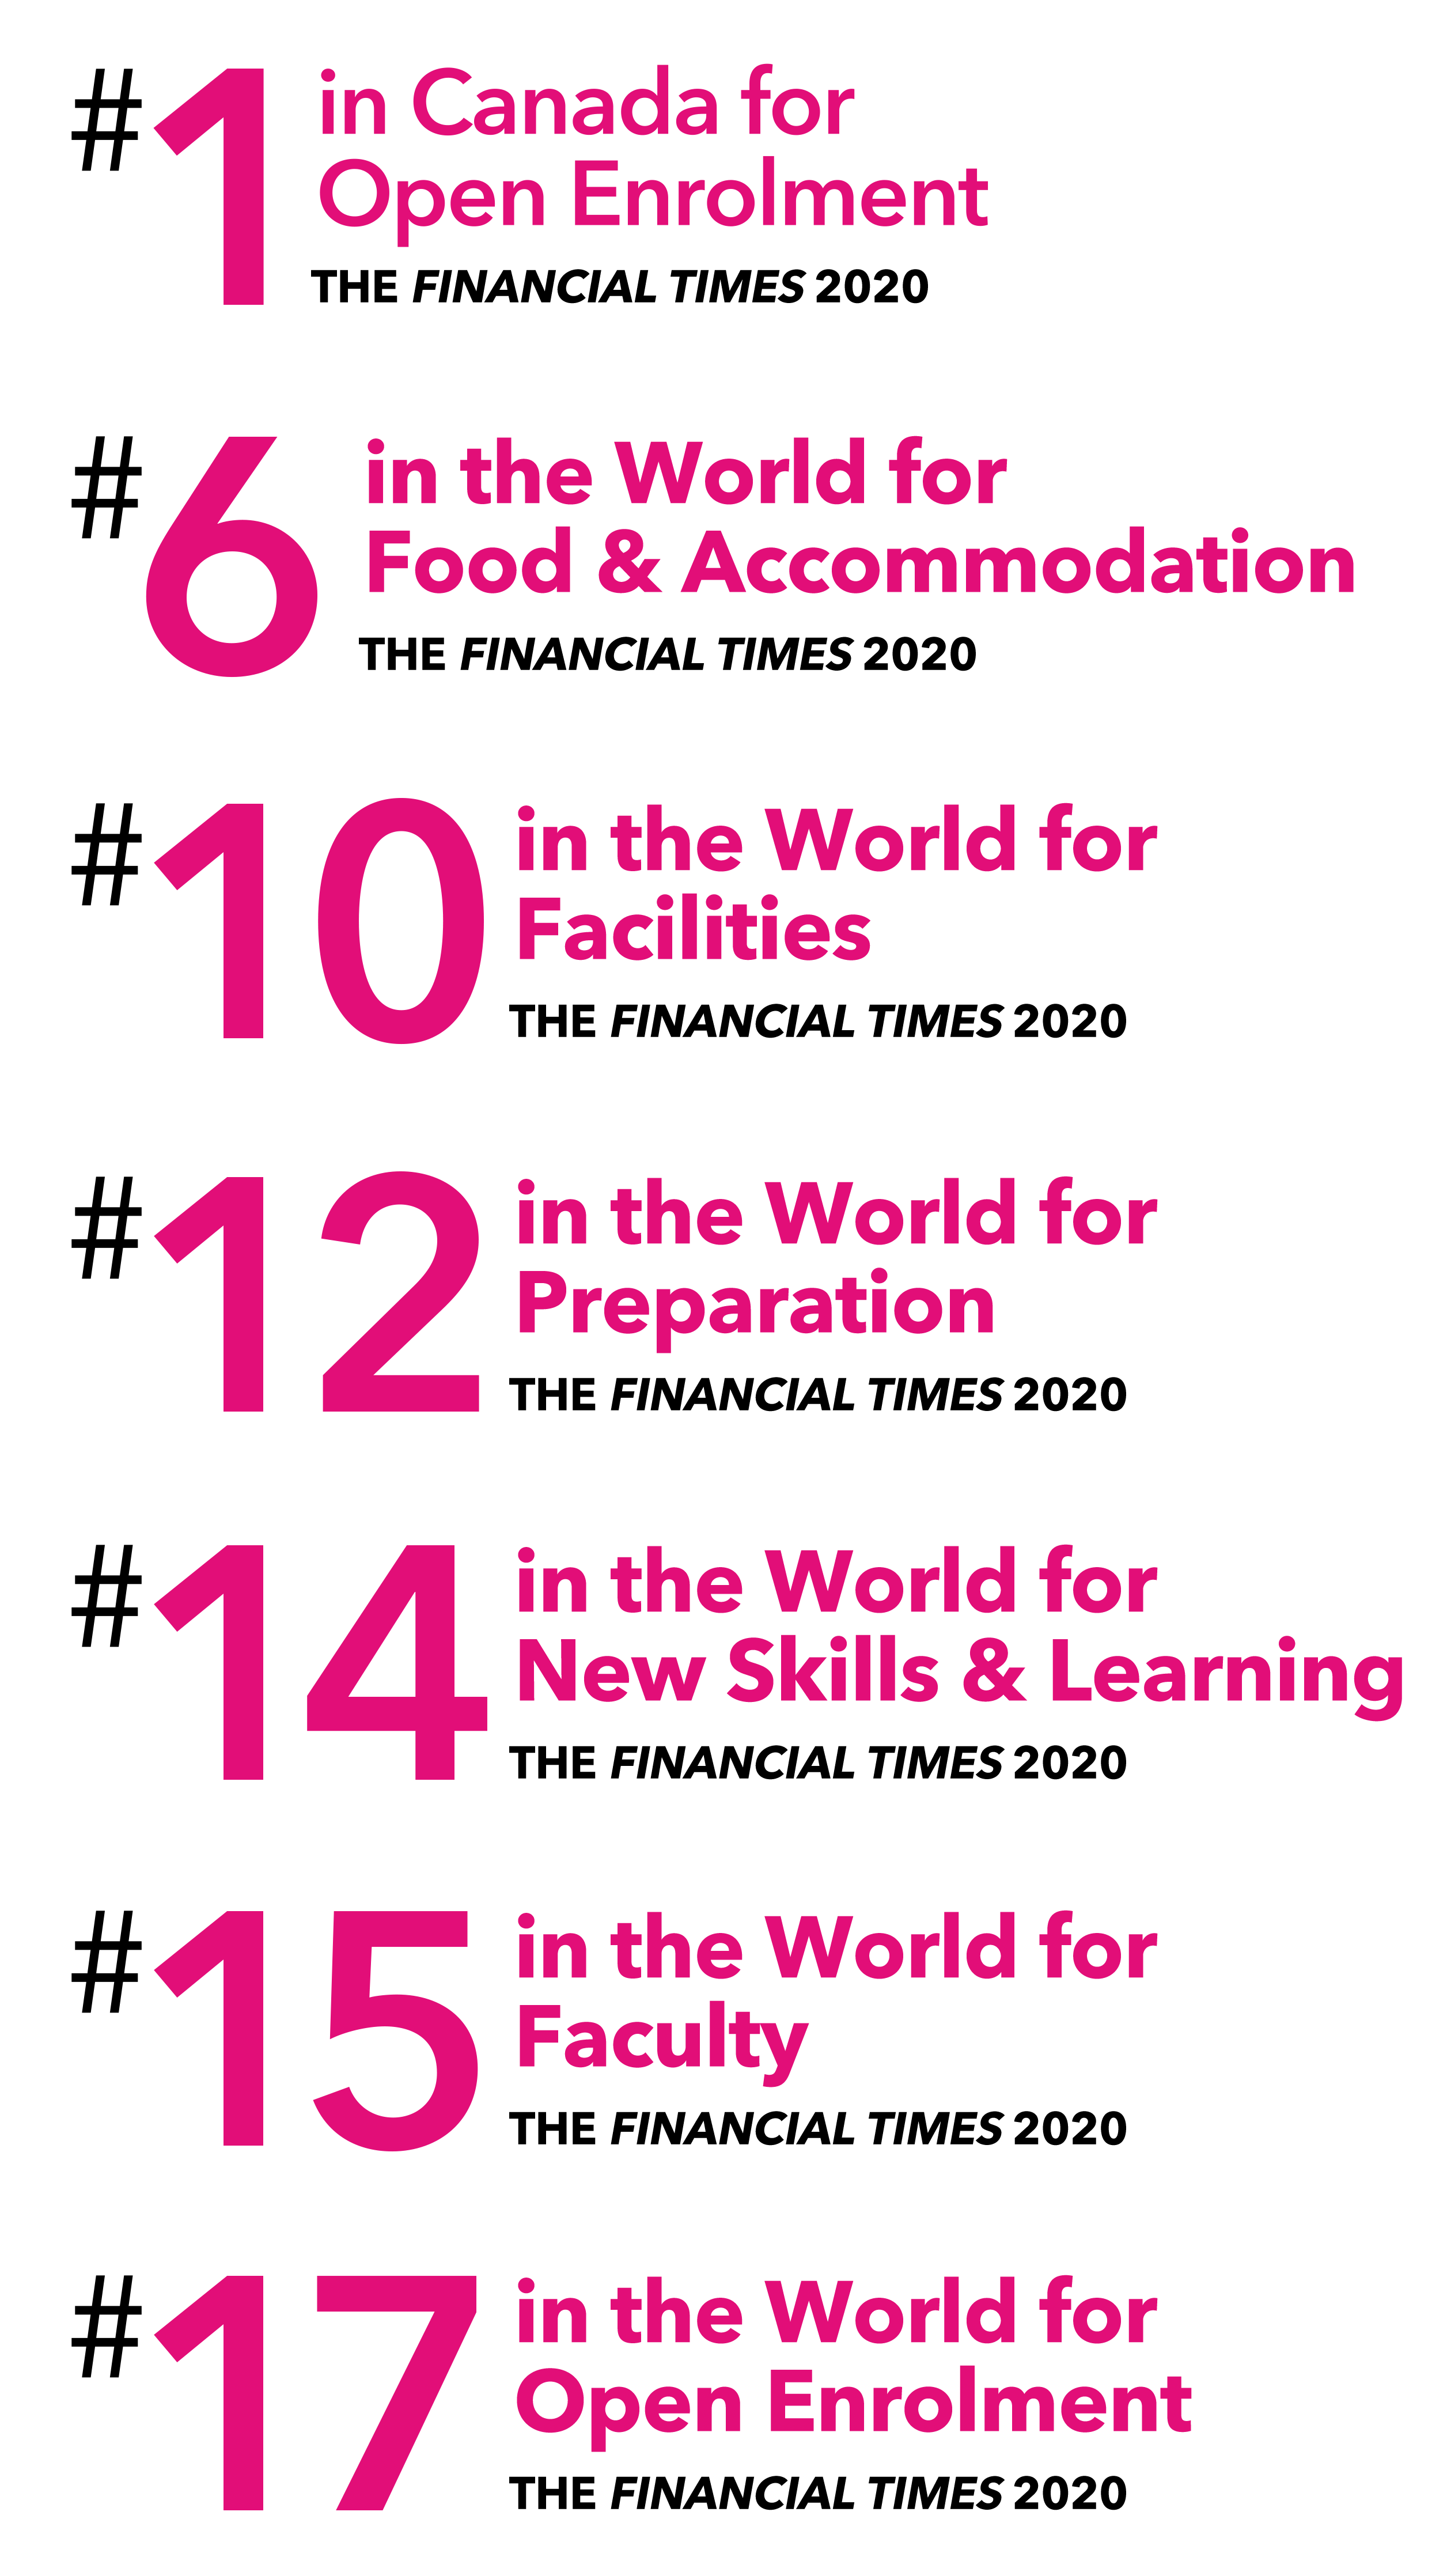 #1 in Canada for Open Education, #6 in the World for Food & Accomodation, #10 in the World for Facilities, #12 in the World for Preparation, #14 in the World for New Skills & Learning, #15 in the World for Faculty, #17 in the World for Open Enrolment